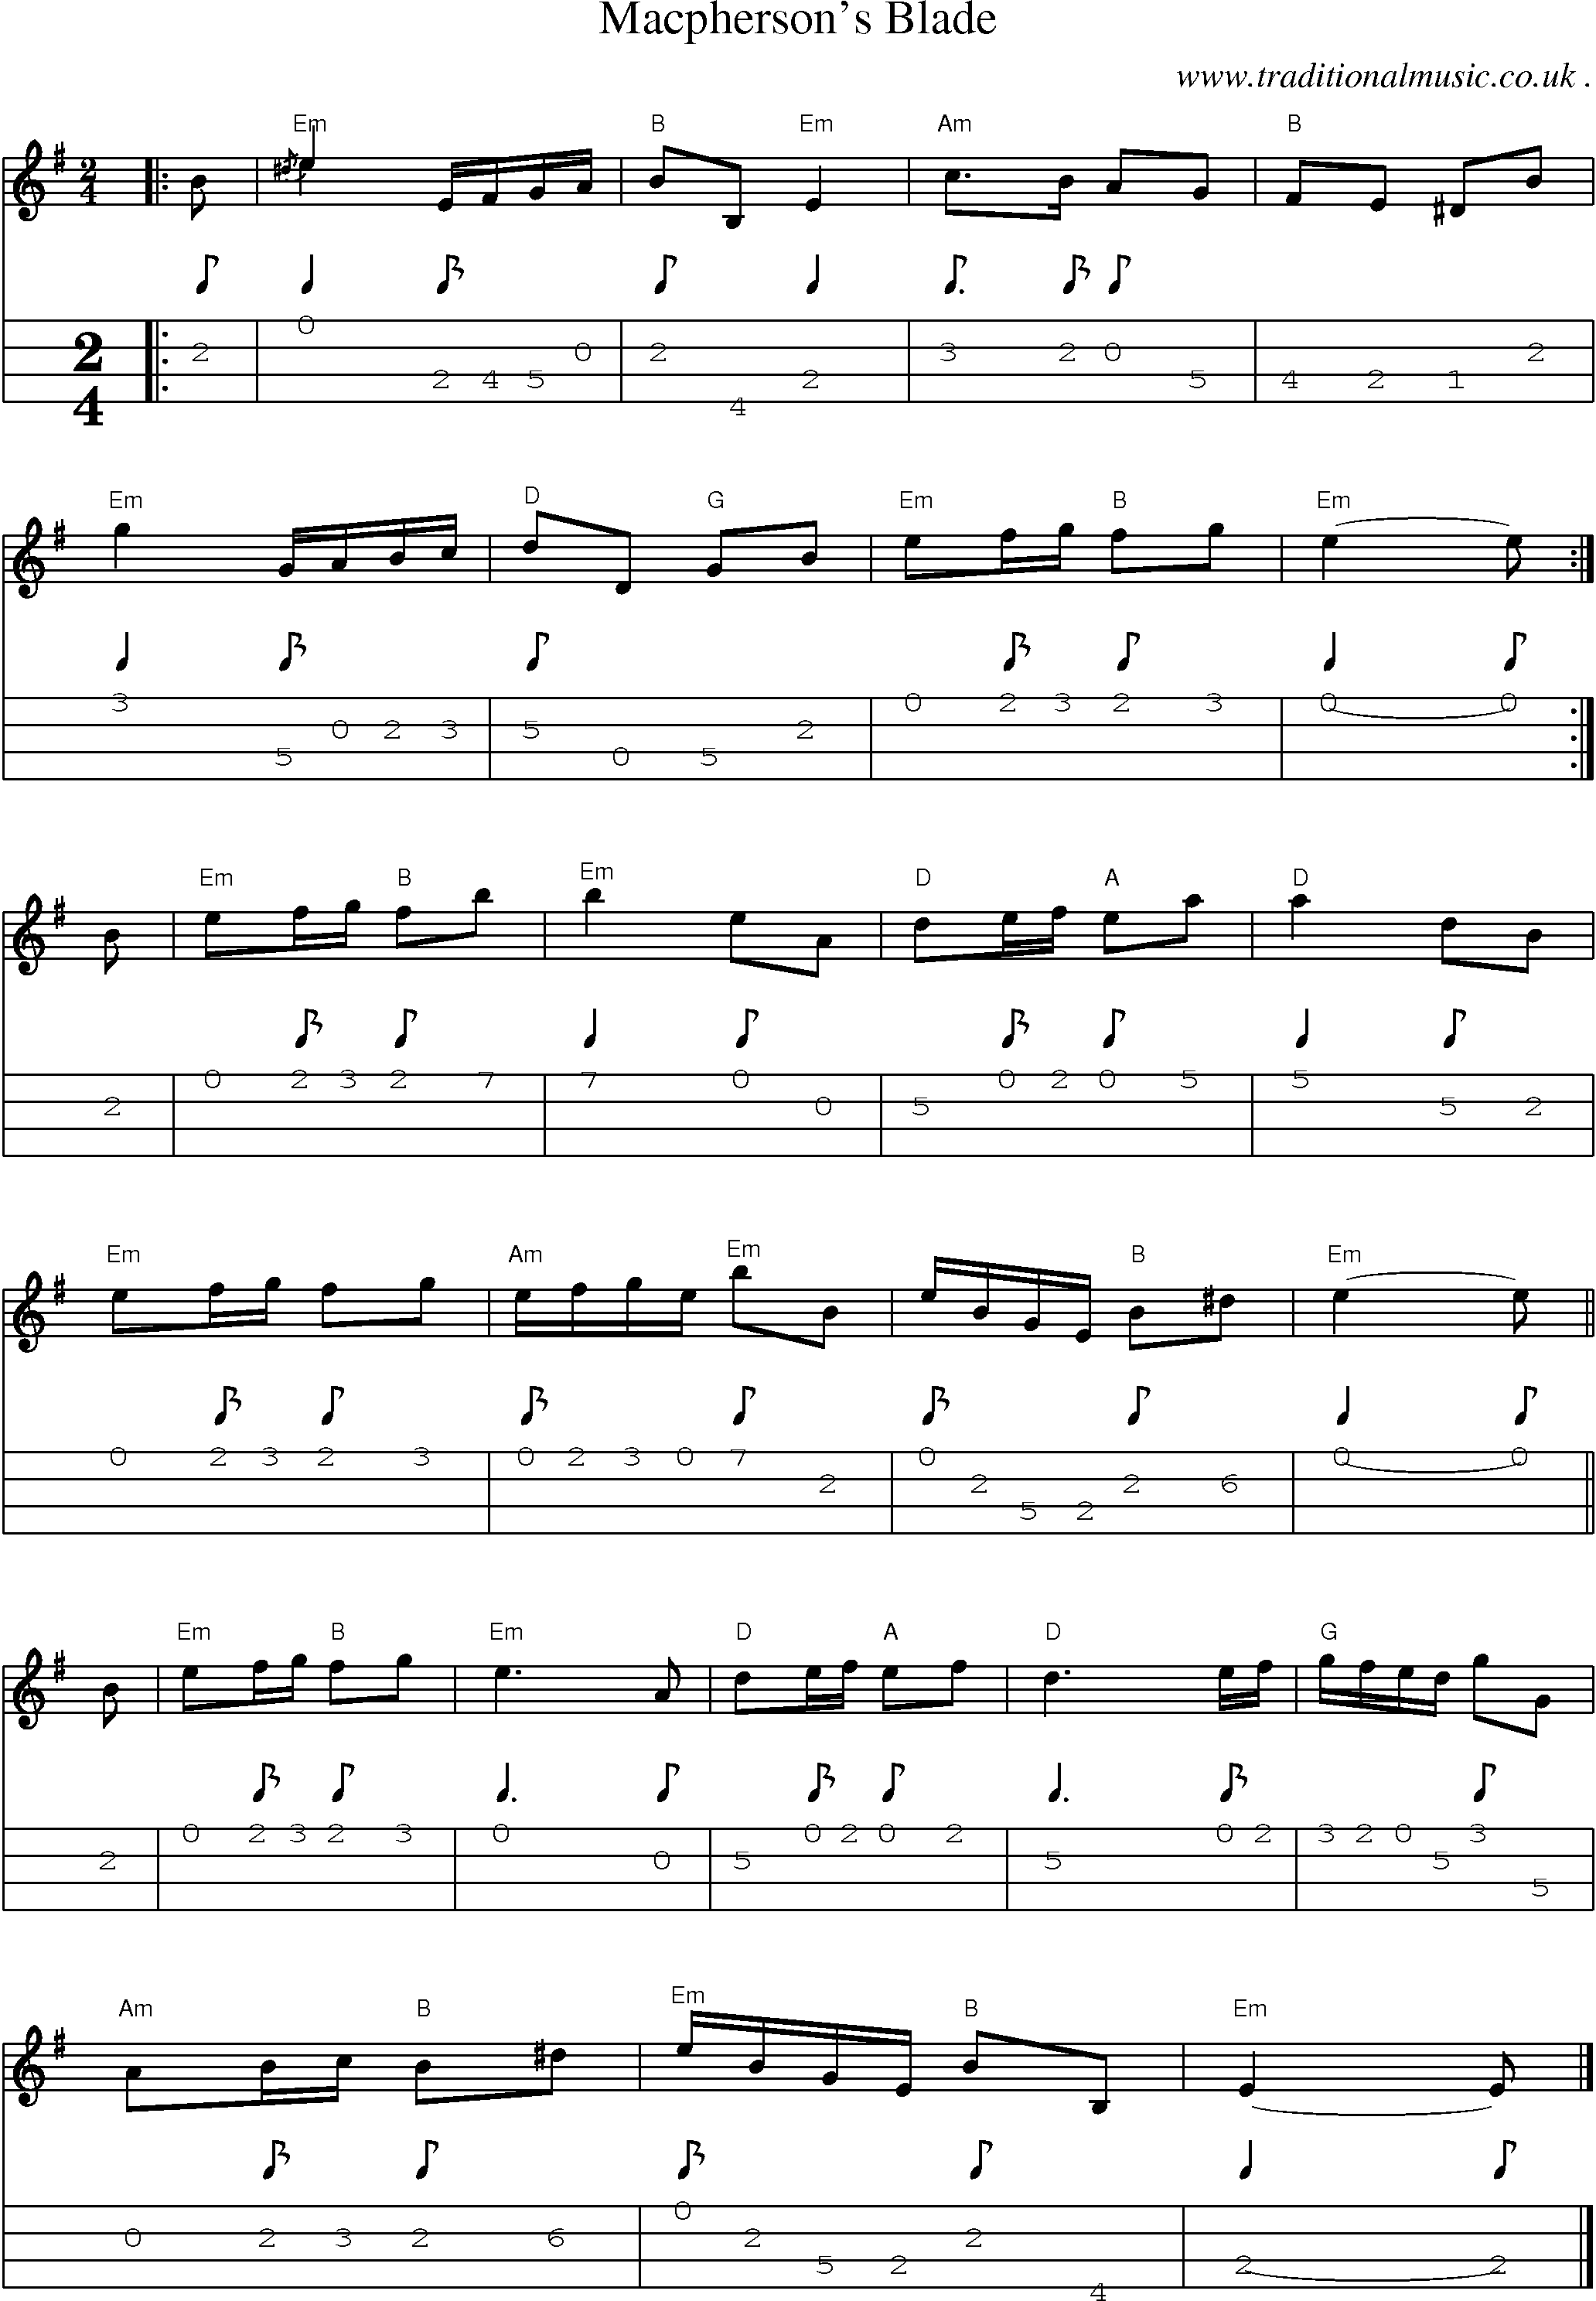 Sheet-music  score, Chords and Mandolin Tabs for Macphersons Blade